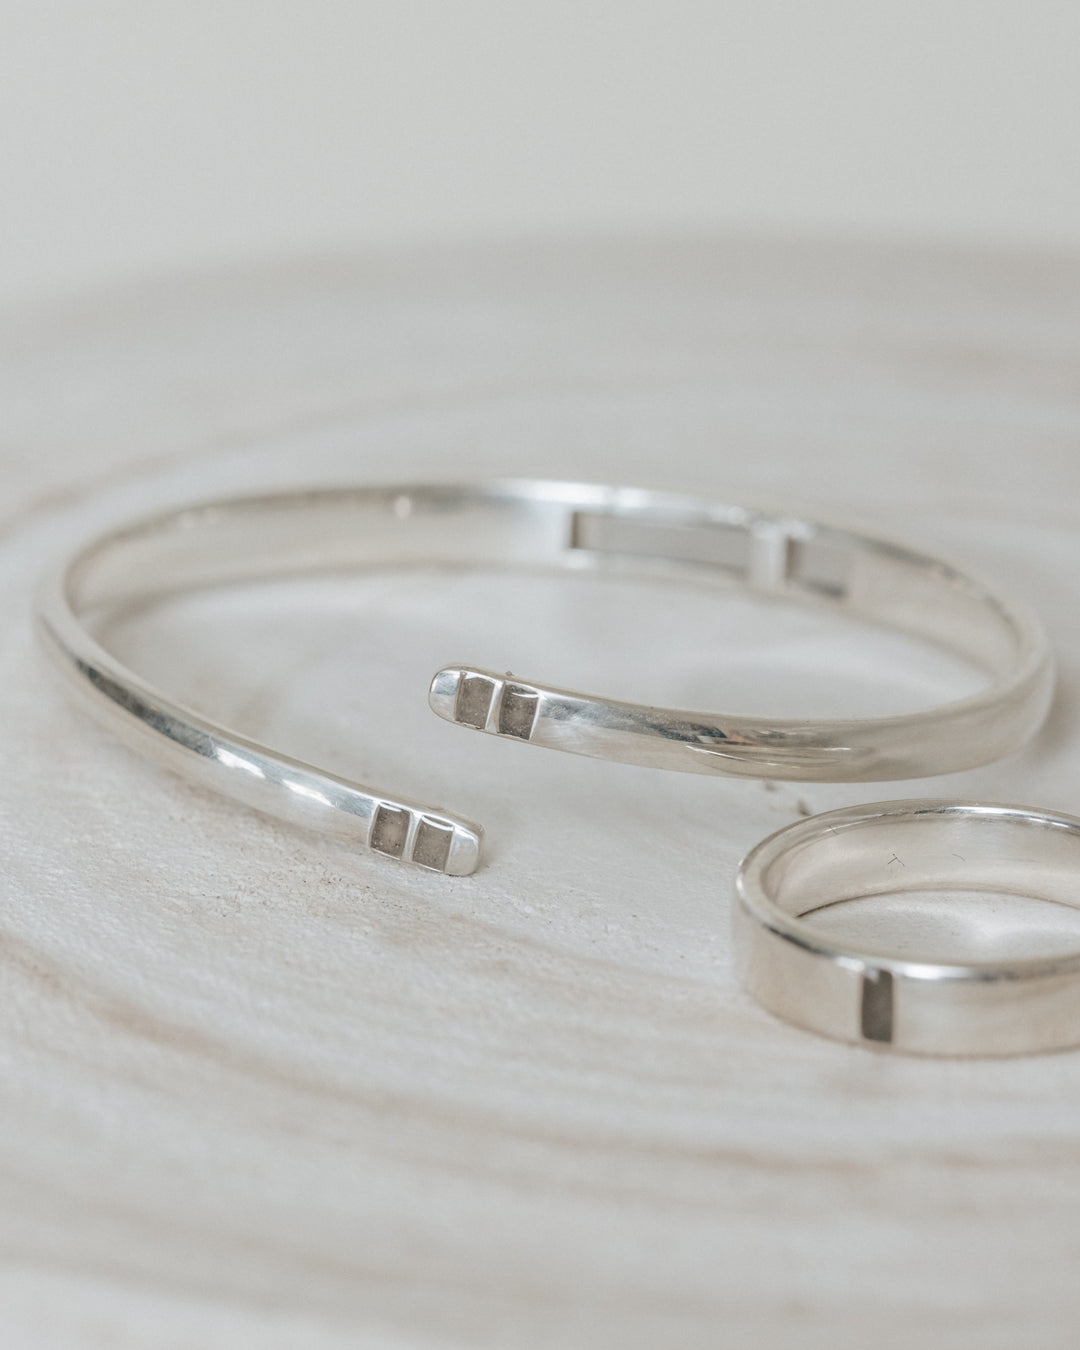 A close up showing the cremation settings in two of close by me jewelry's memorial ring and bracelet designs